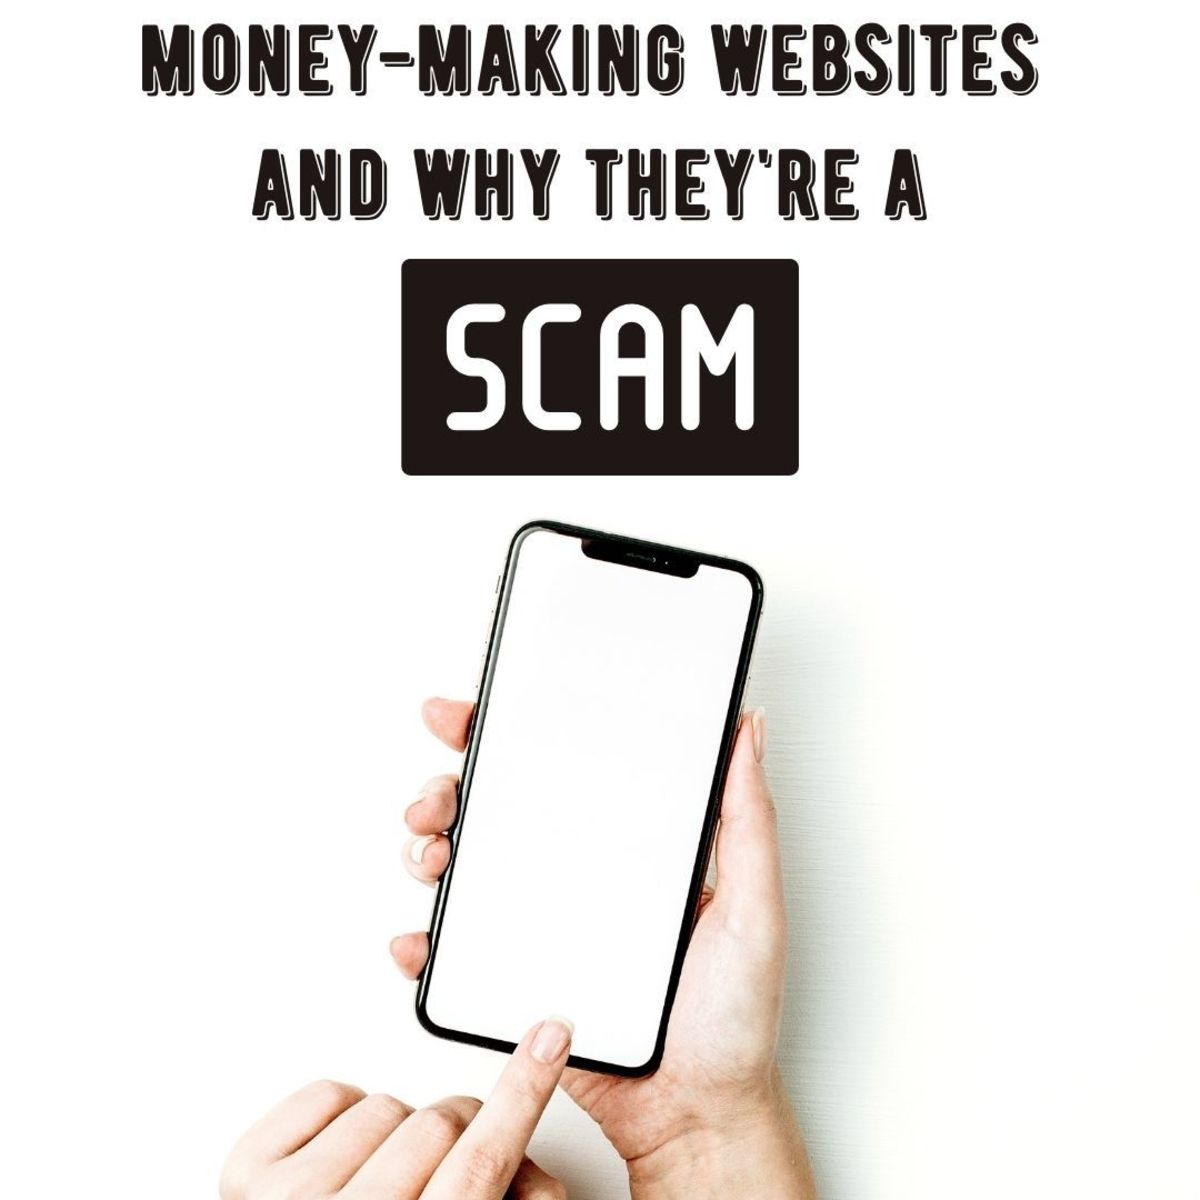 Why Online Money-Making Websites Are a Scam